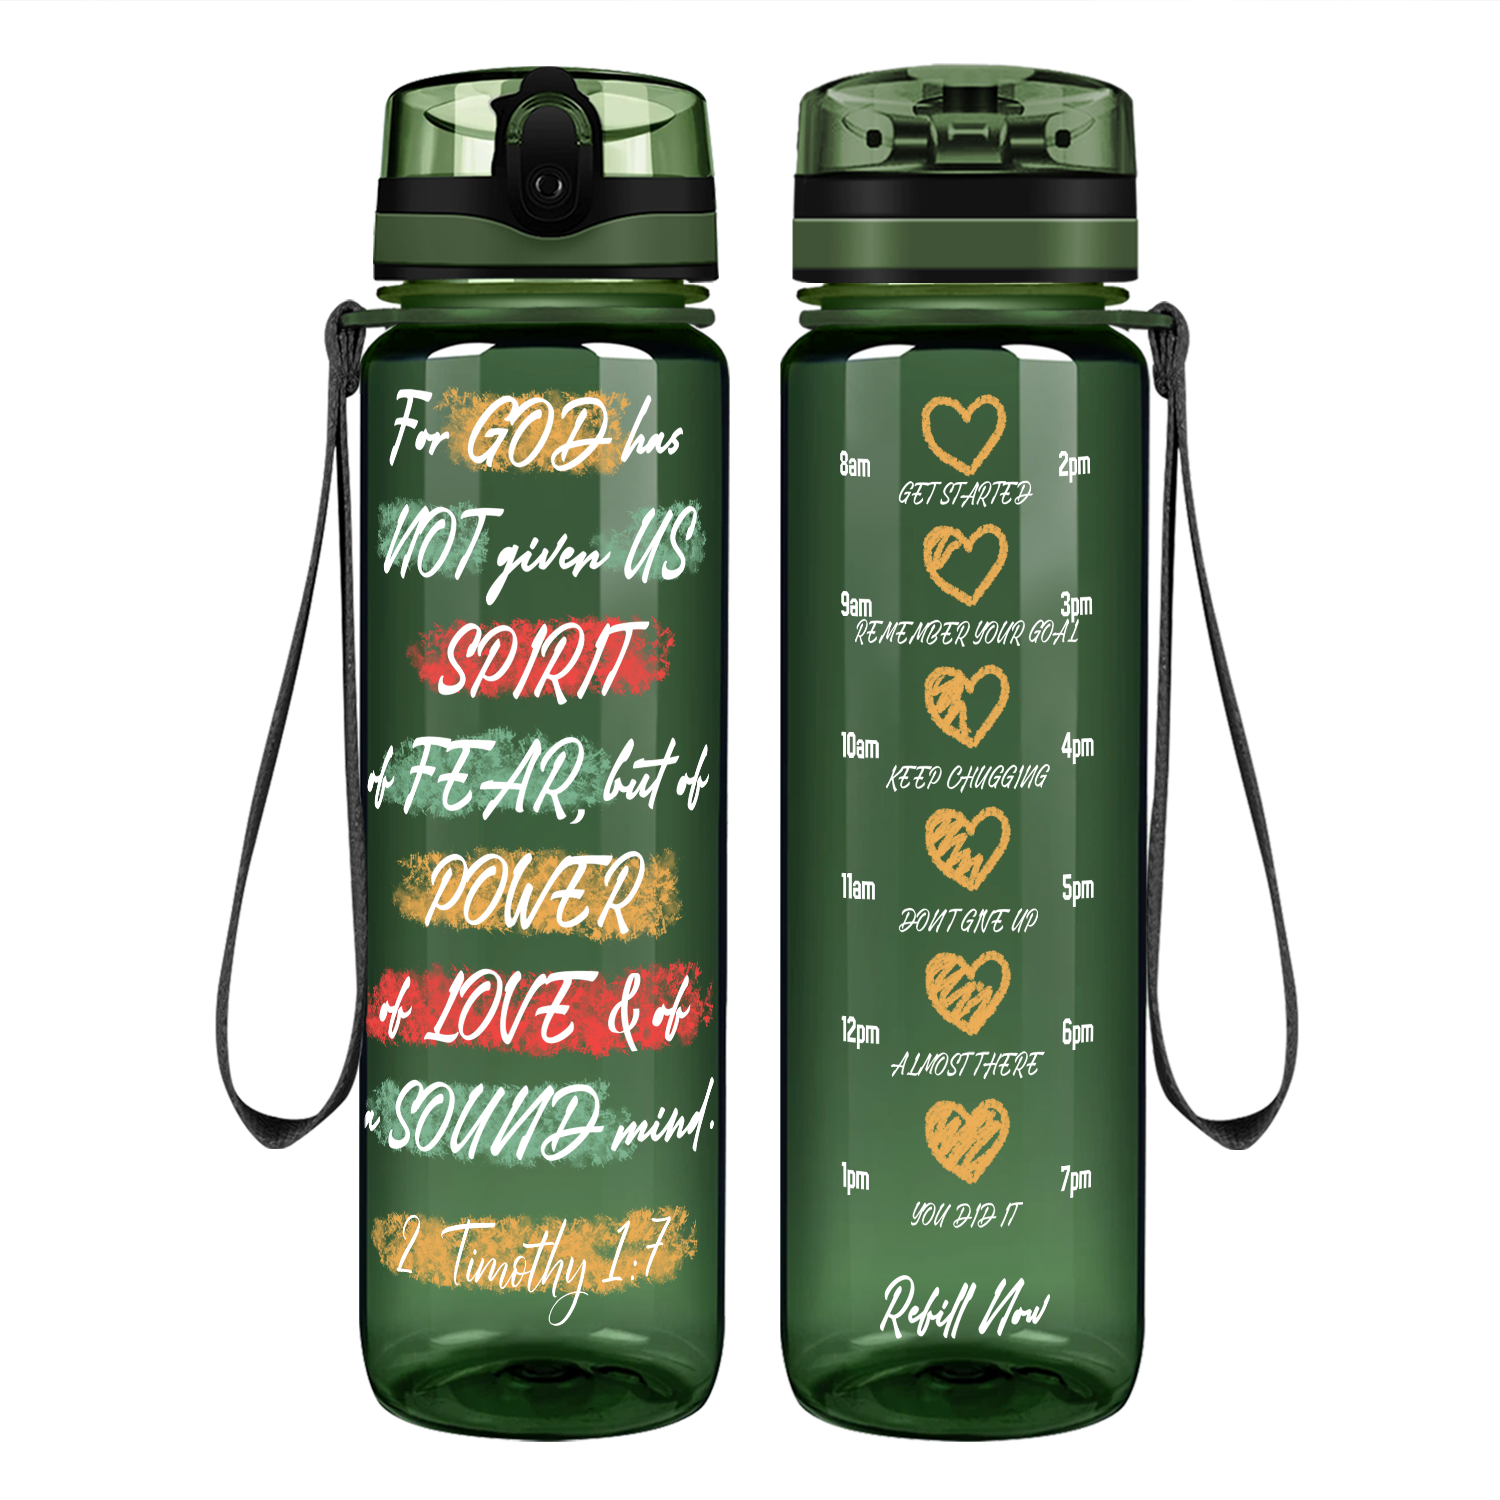 For God Has Not Given Us Spirit of Fear Motivational Tracking Water Bottle